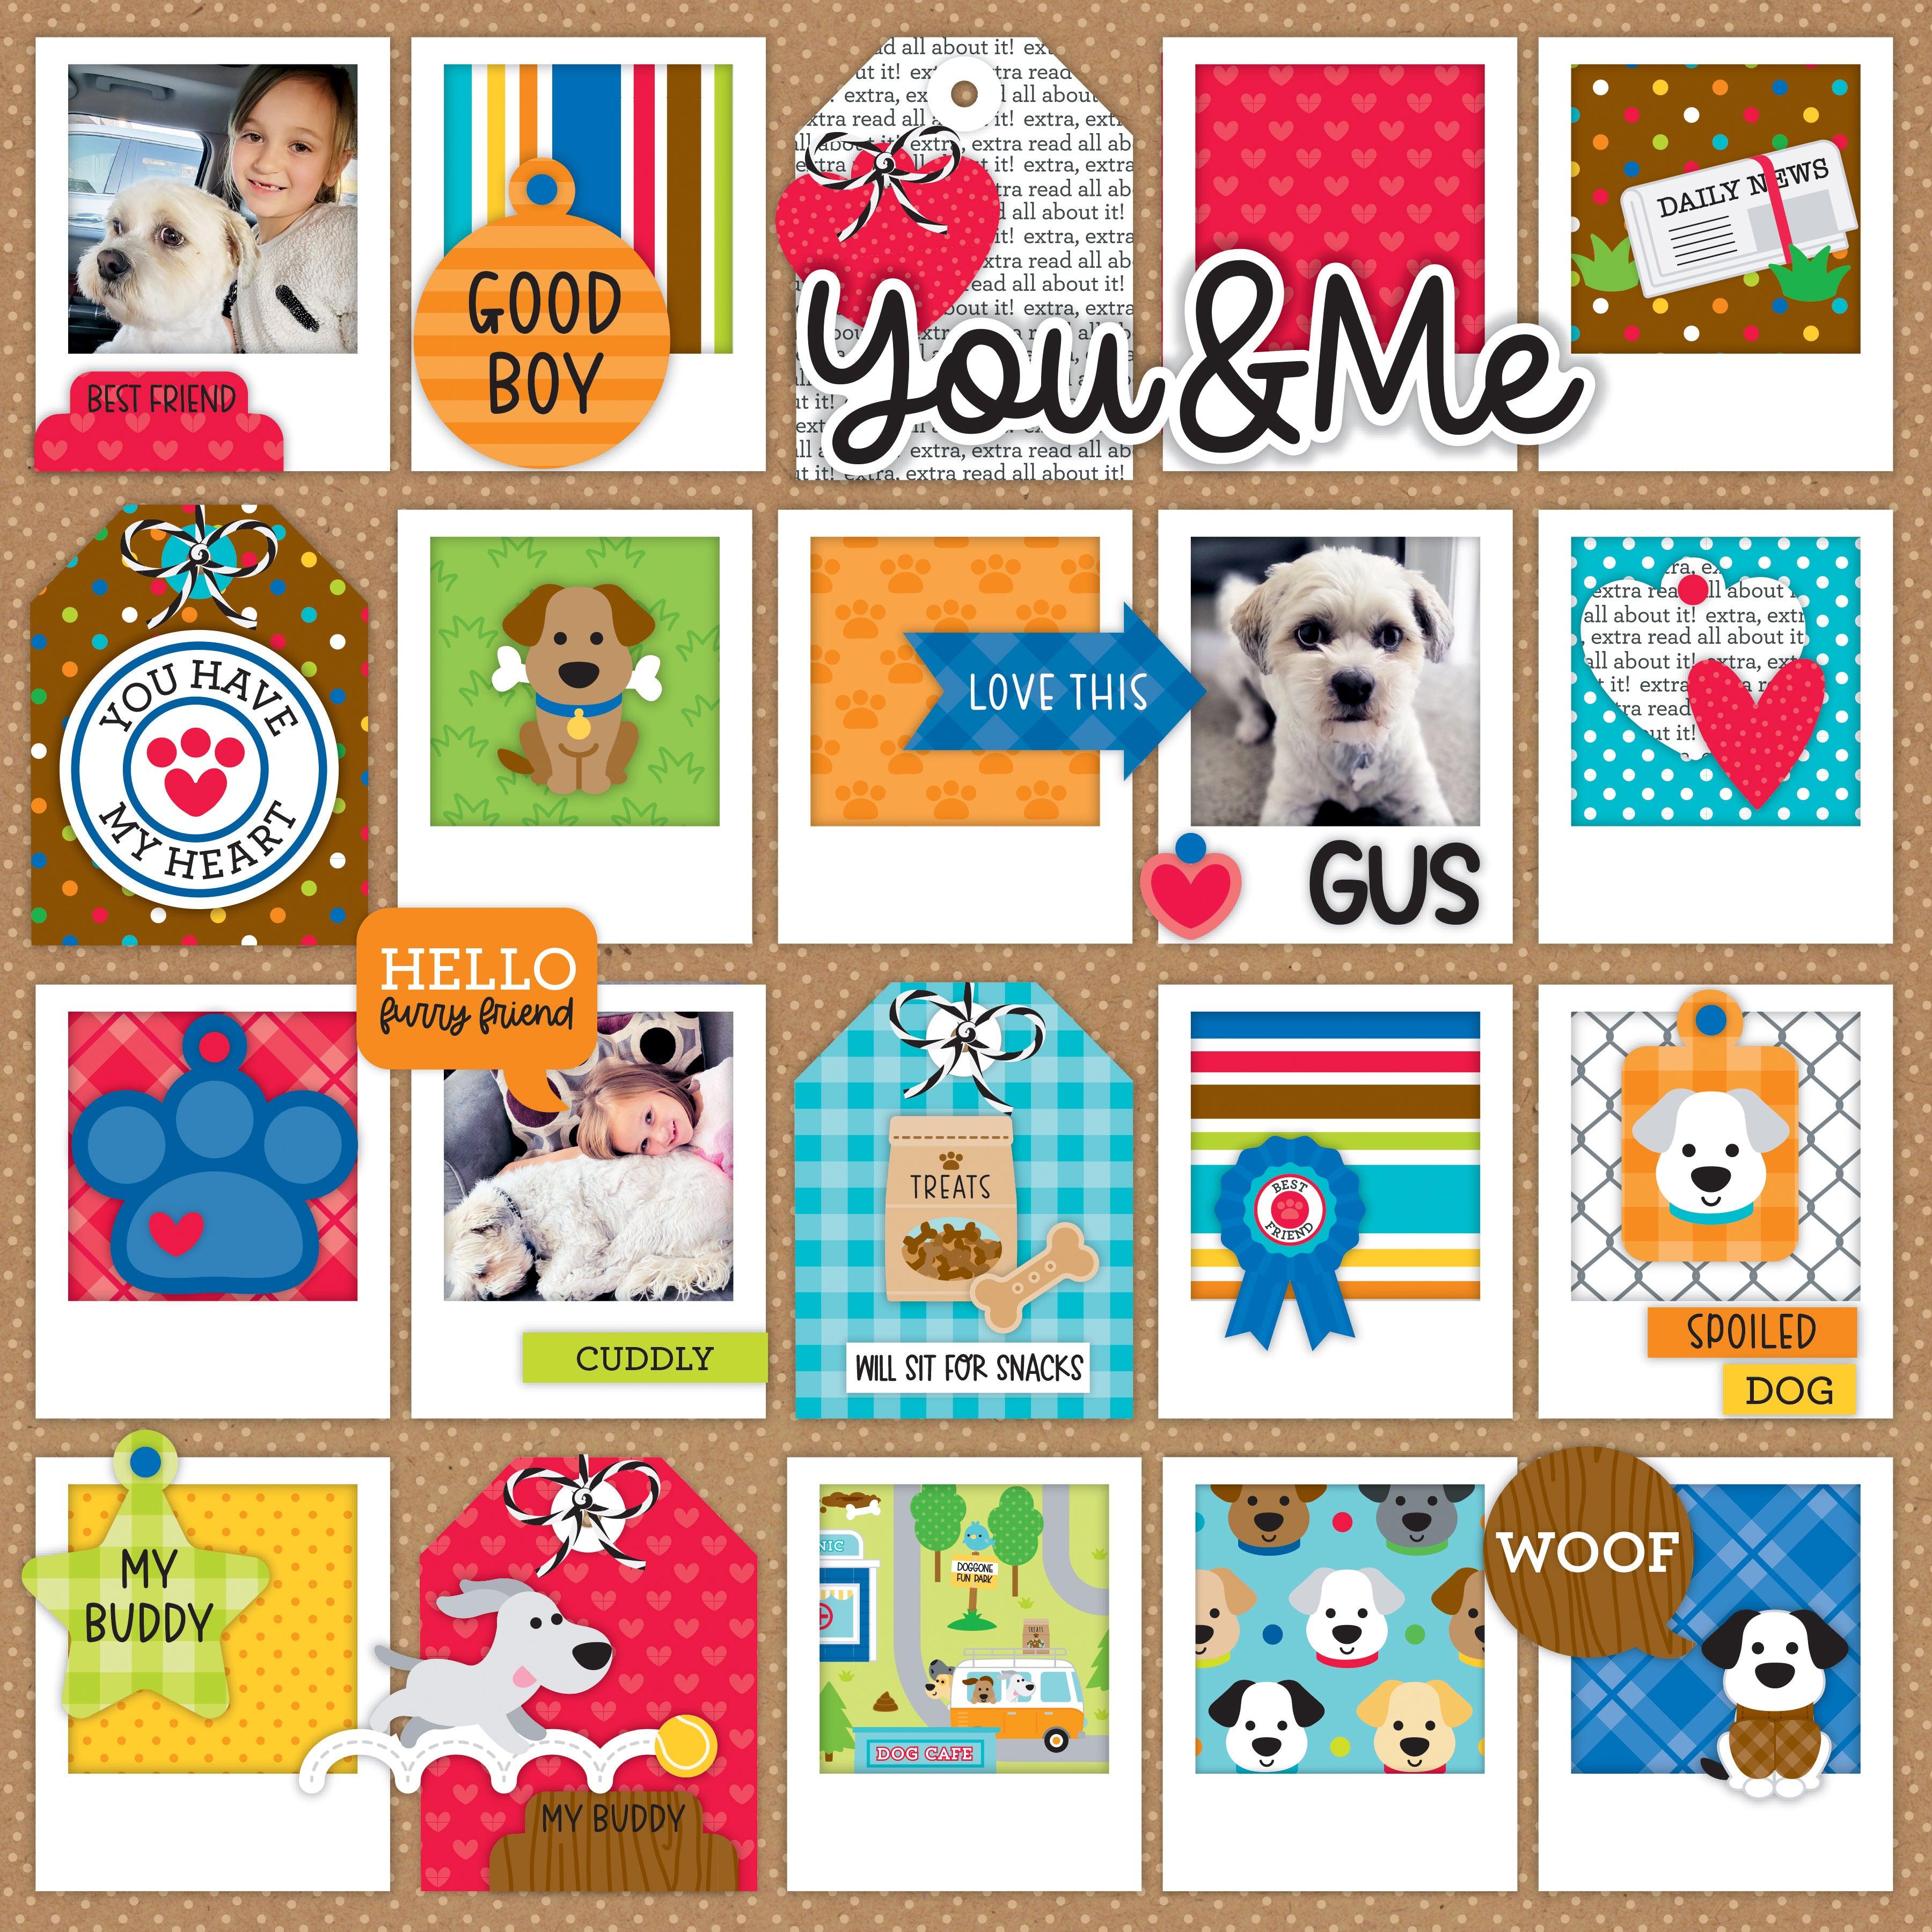 Doggone Cute Collection Good Boy! 12 x 12 Double-Sided Scrapbook Paper by Doodlebug Design - Scrapbook Supply Companies